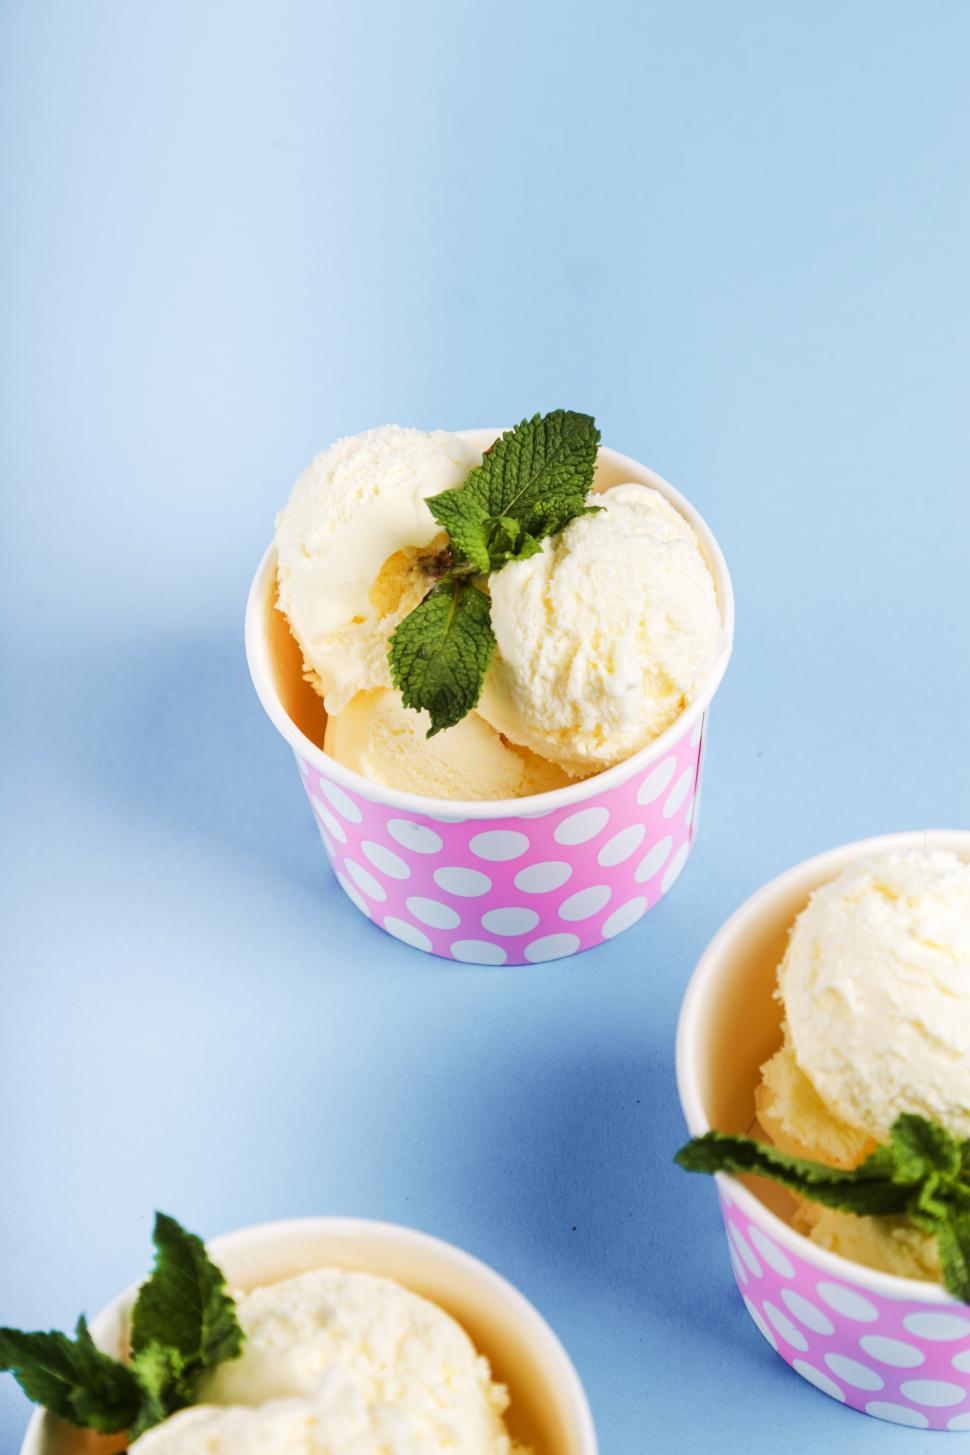 Free Image of Gourmet ice-cream with sprig of mint 